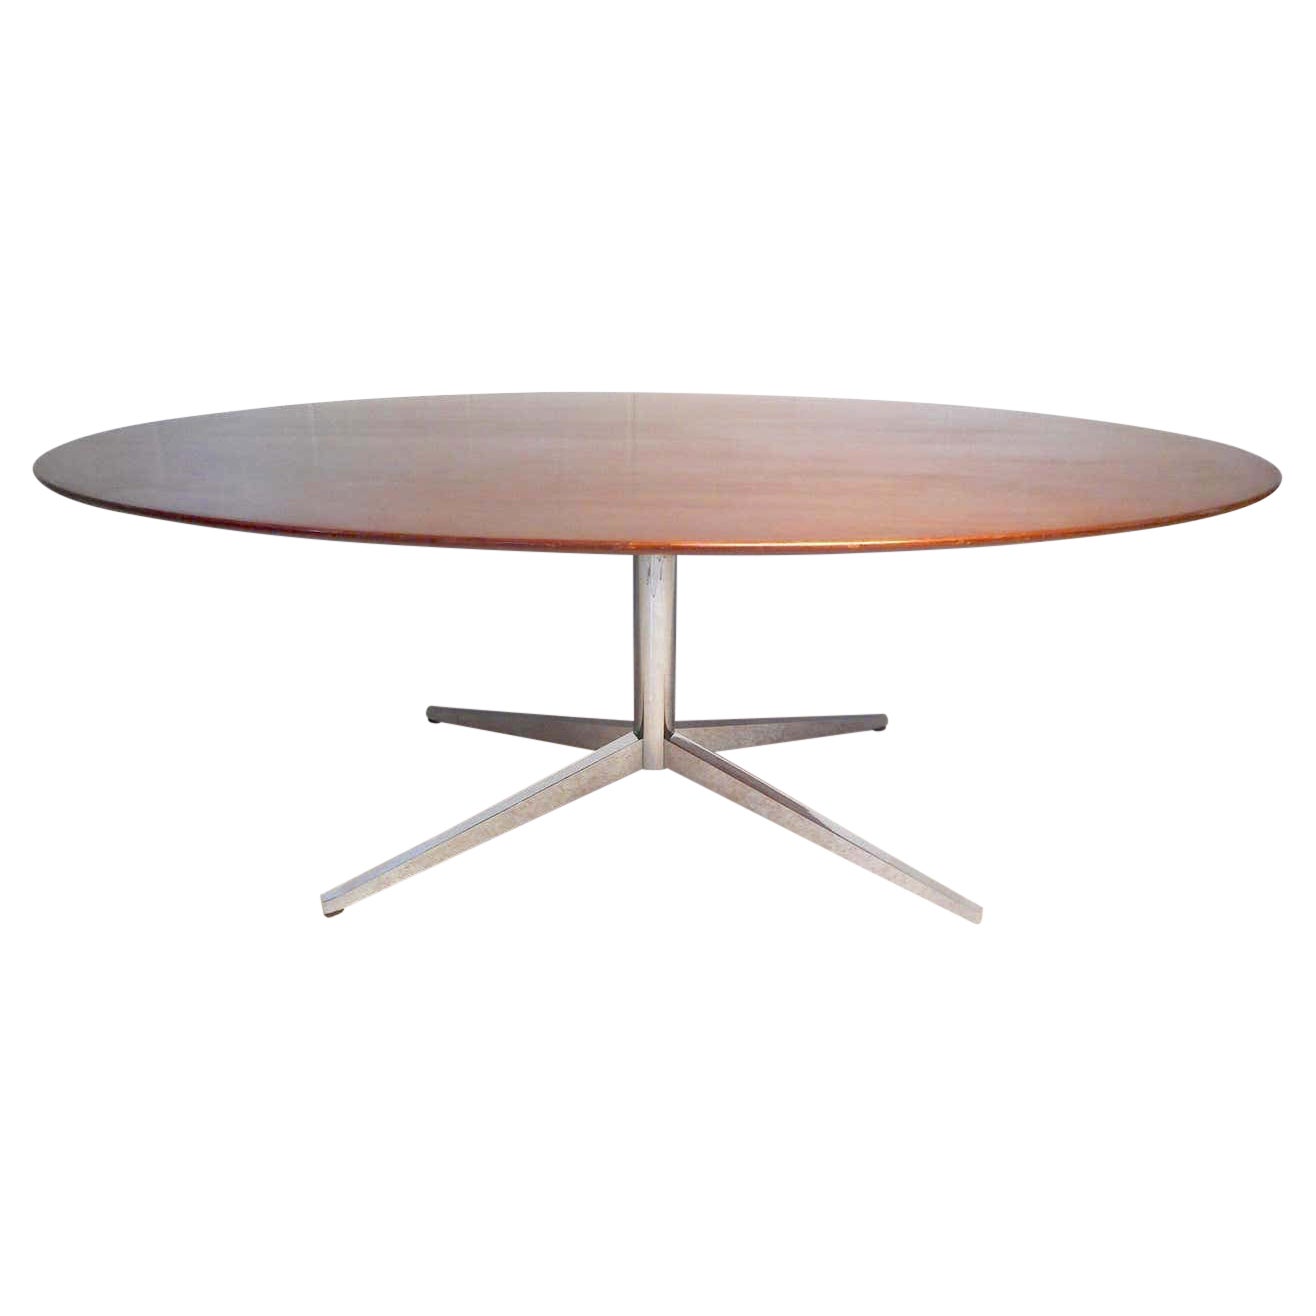 Six Foot Midcentury Dining or Conference Table by Knoll